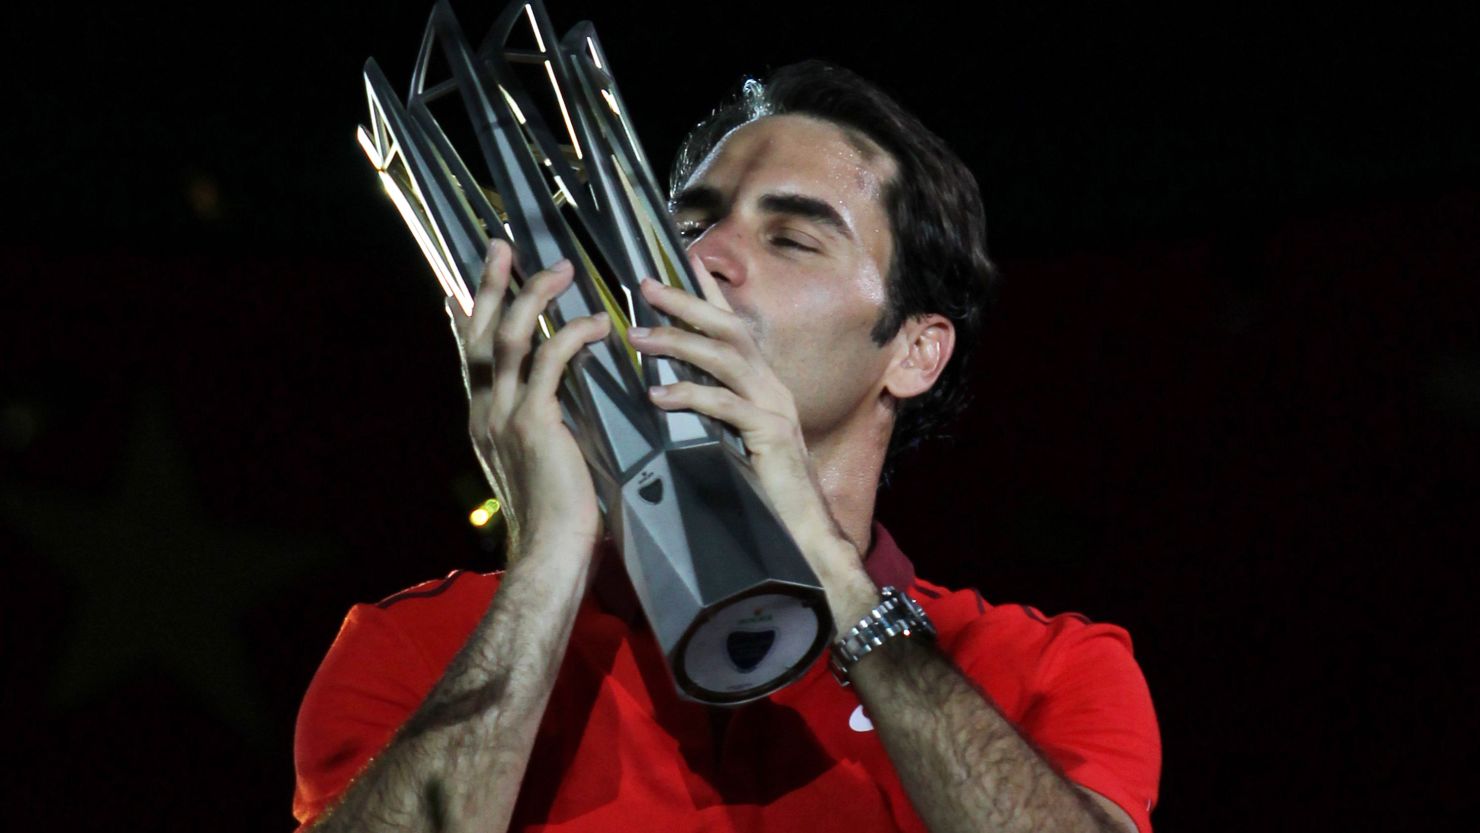 Sealed with a kiss: Roger Federer wins his first Shanghai Masters and fourth title of the 2014 season